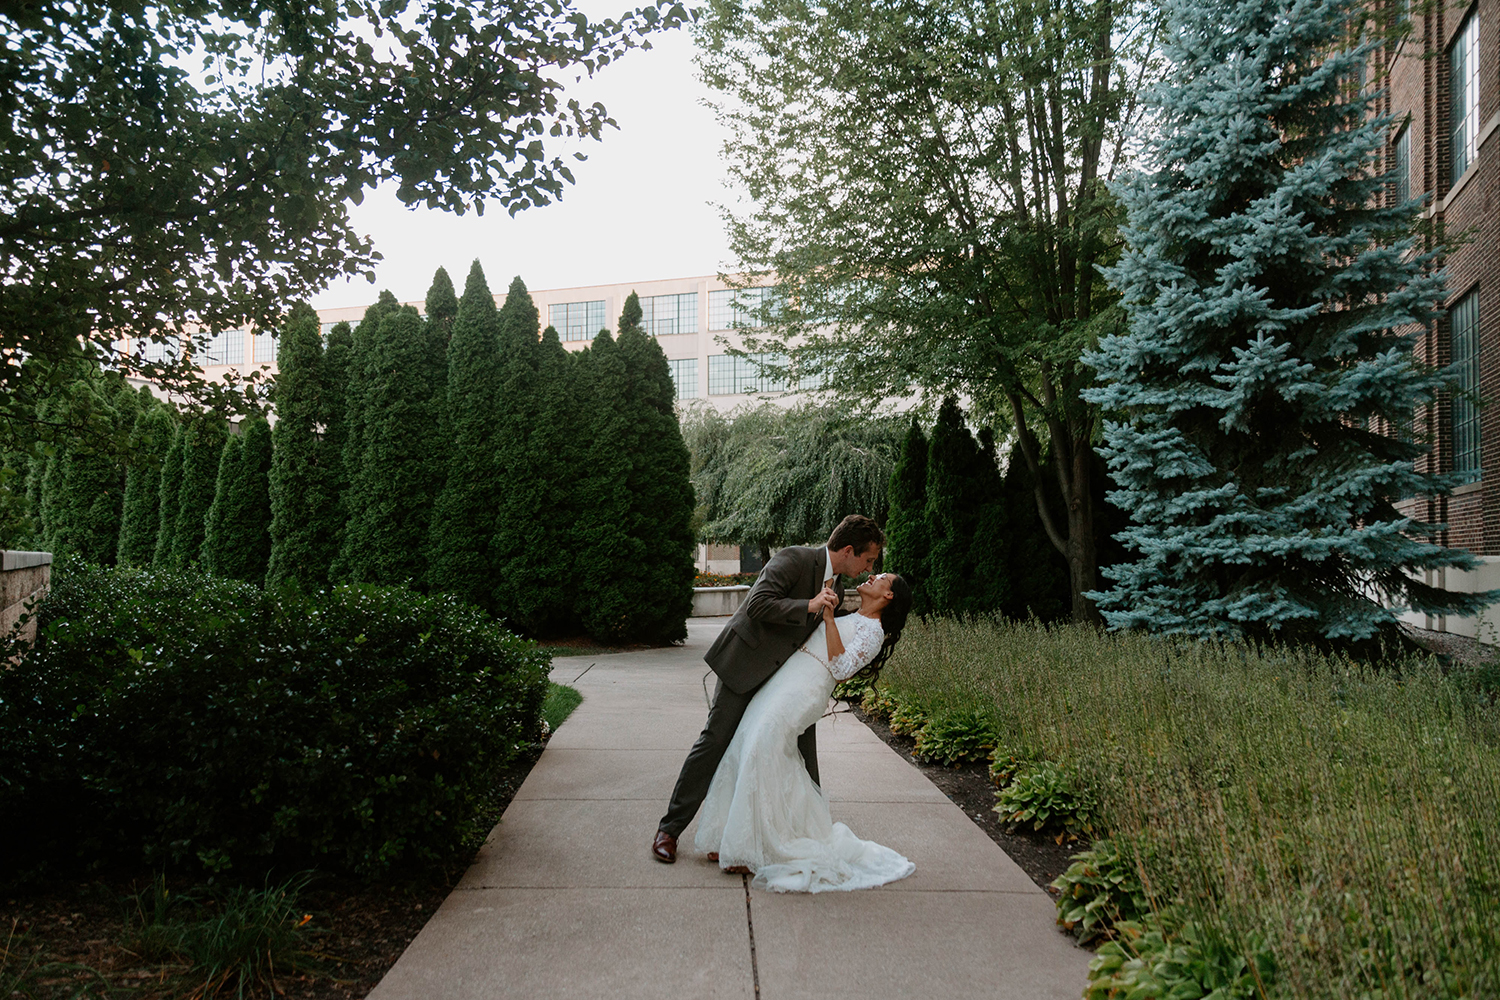 Couple on their wedding day in Grand Rapids, Michigan.